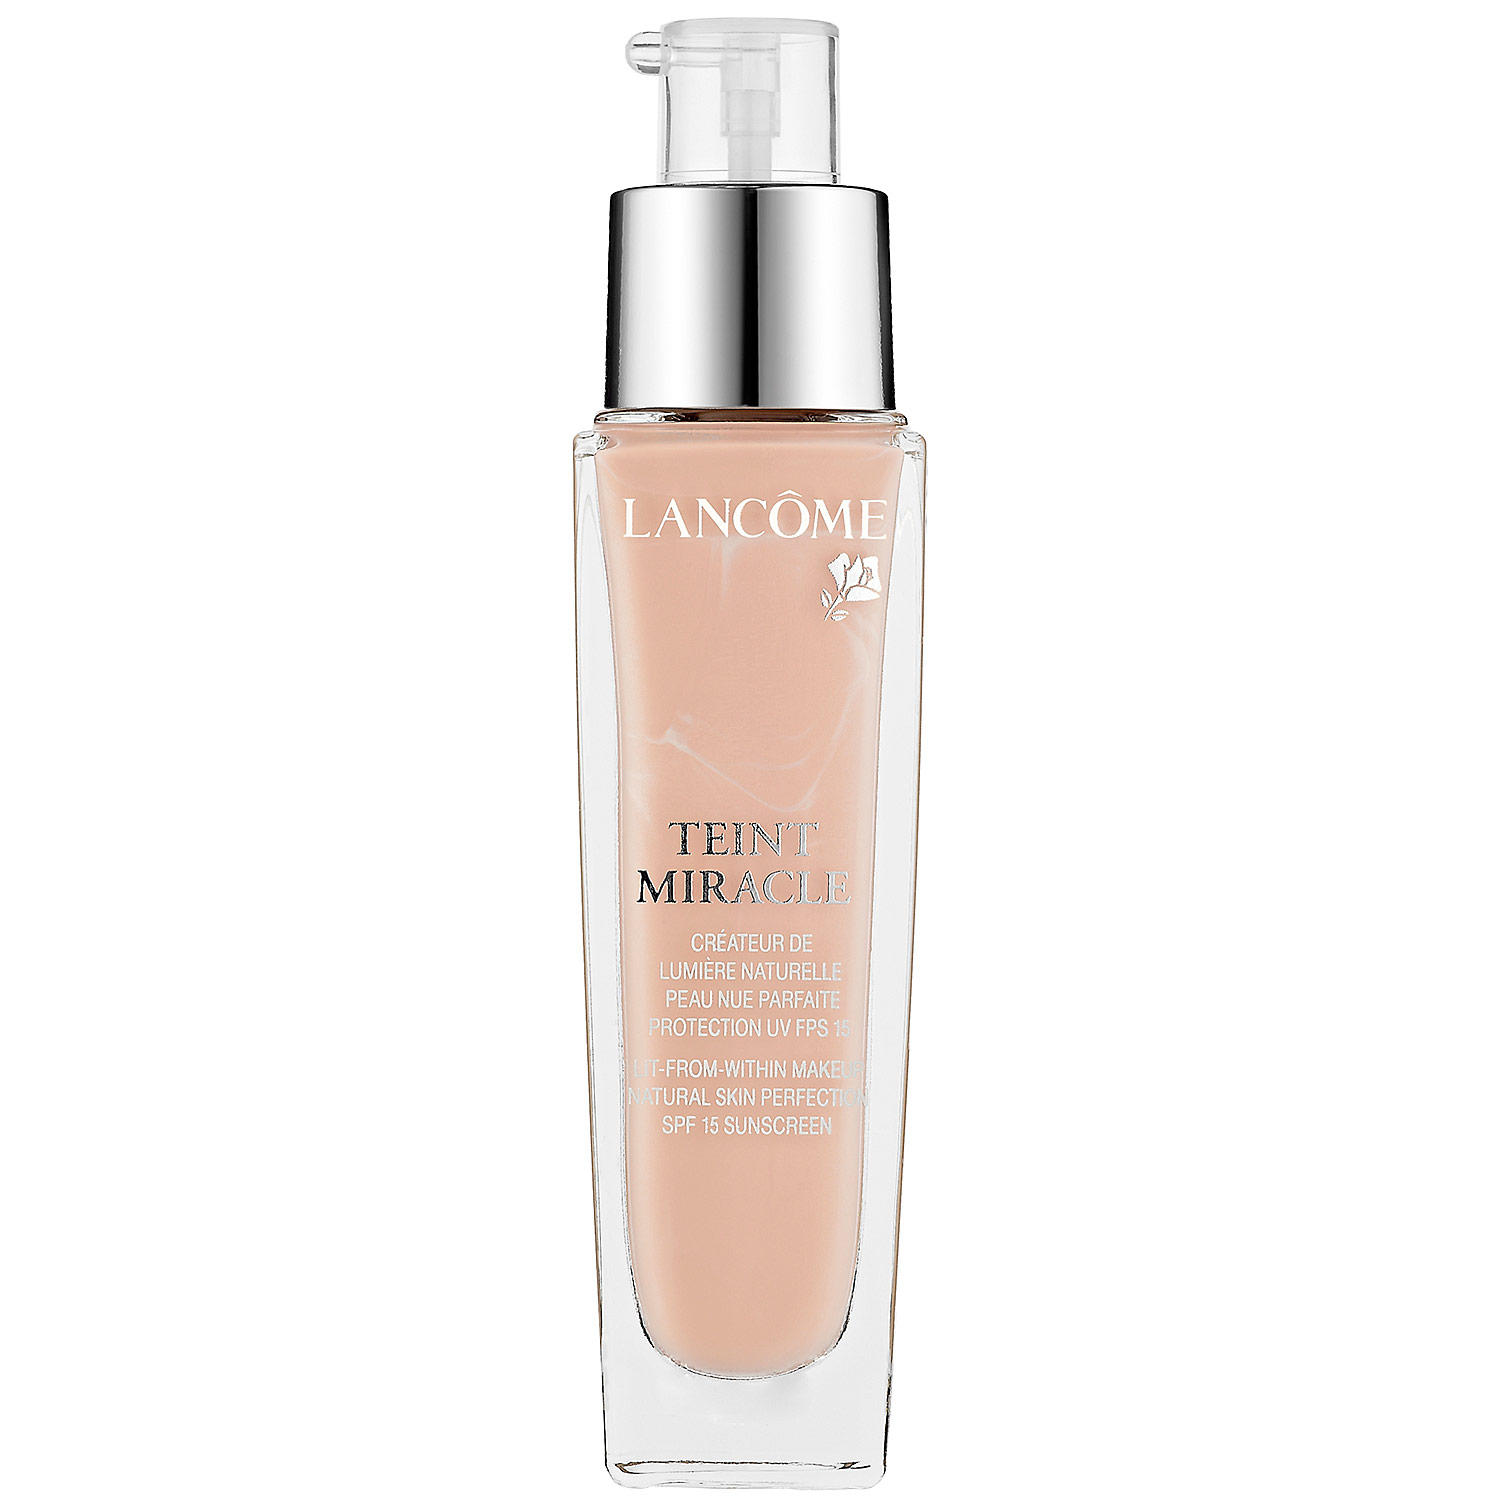 Lancome Teint Miracle Foundation Bisque 2 C